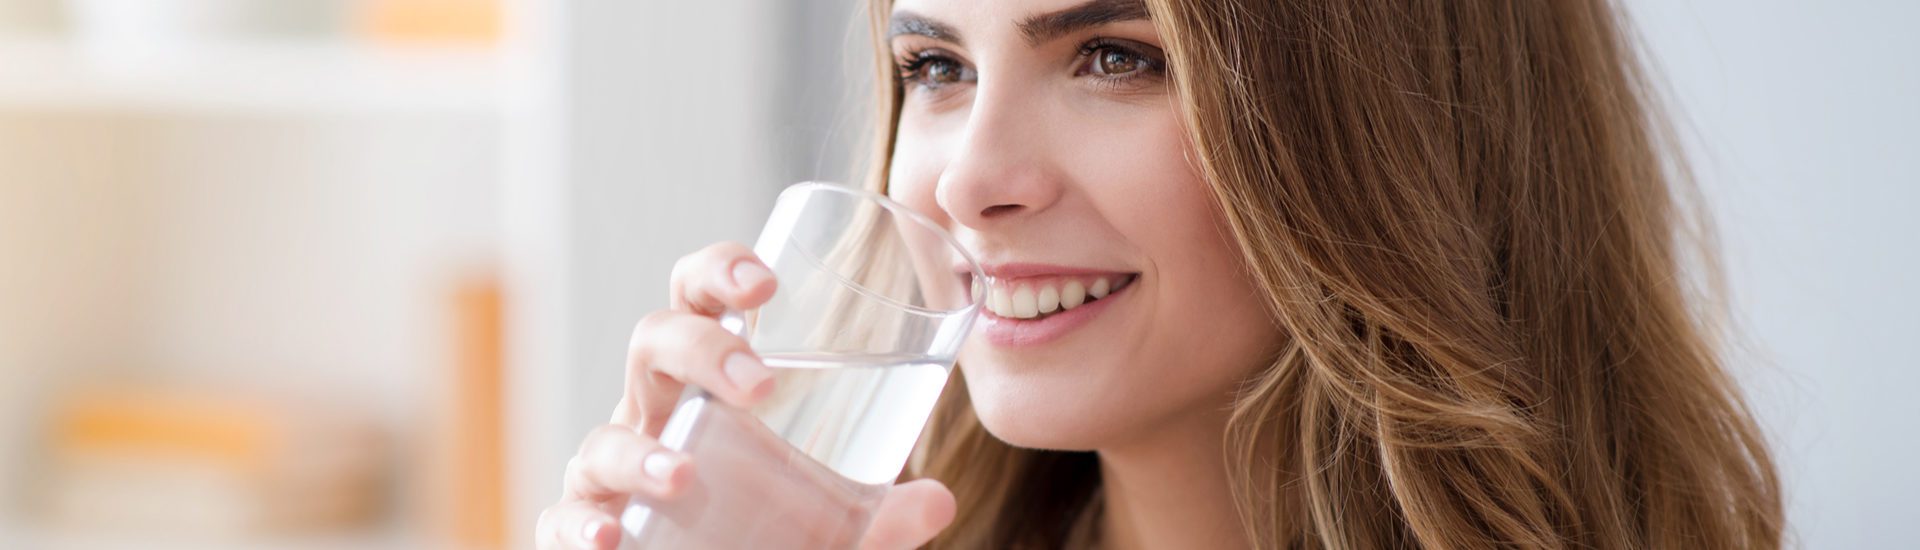 Happily Drink water after fluoride treatment